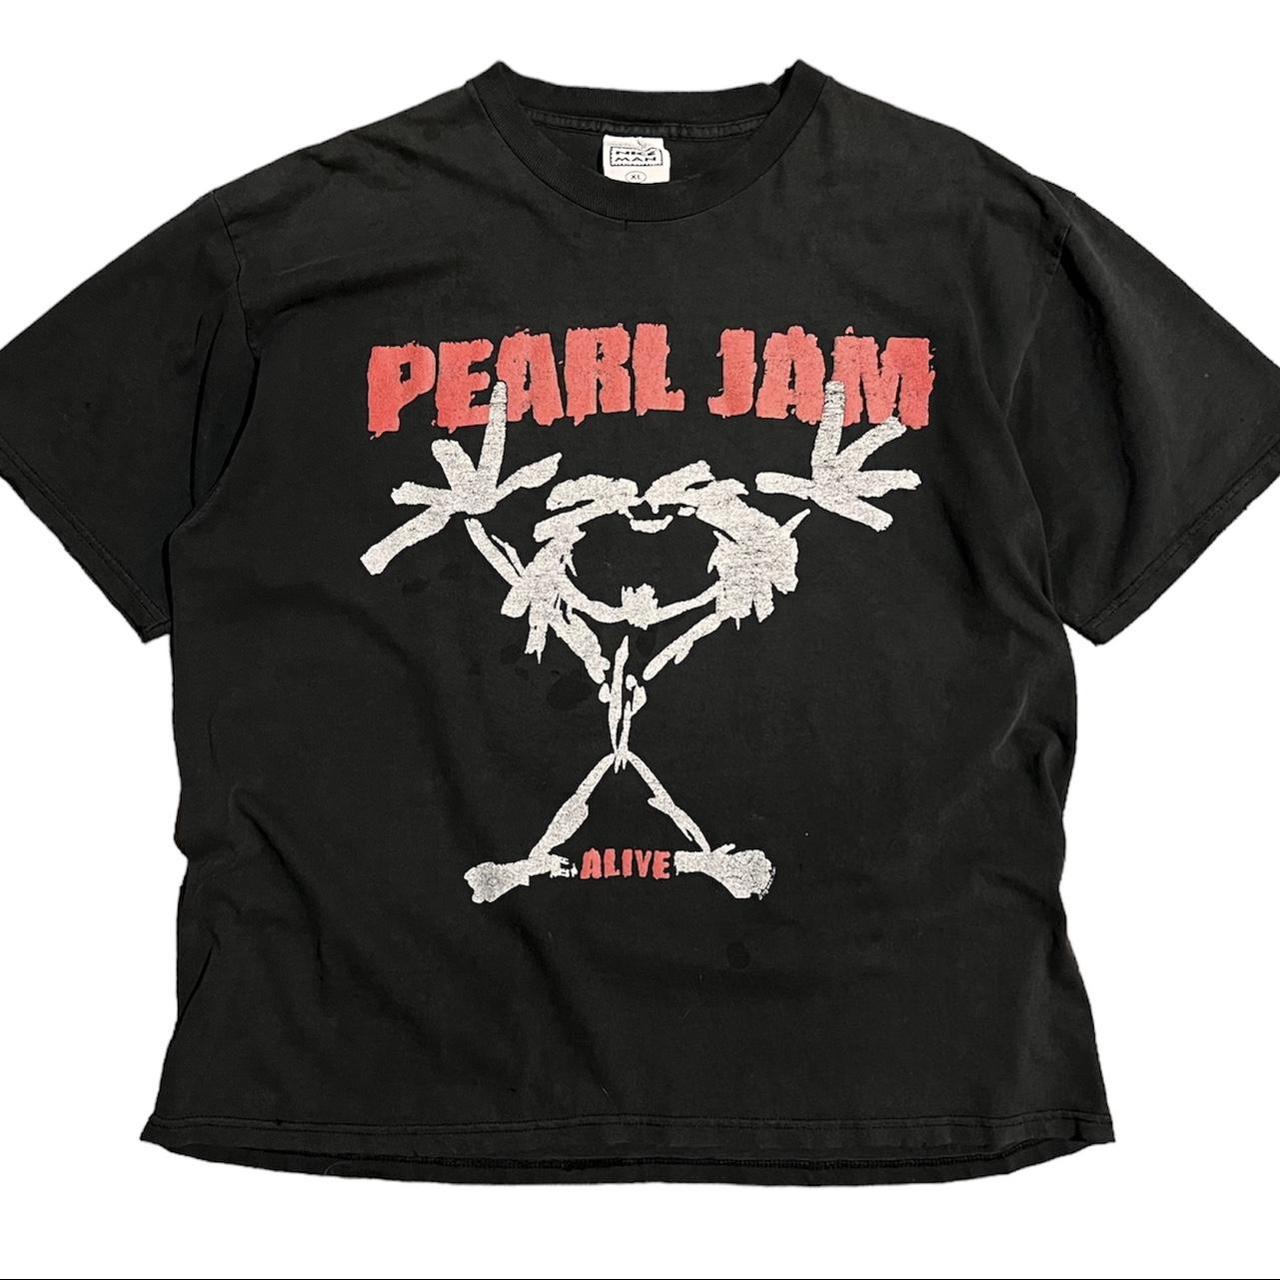 PERAL JAM ALIVE Tee-